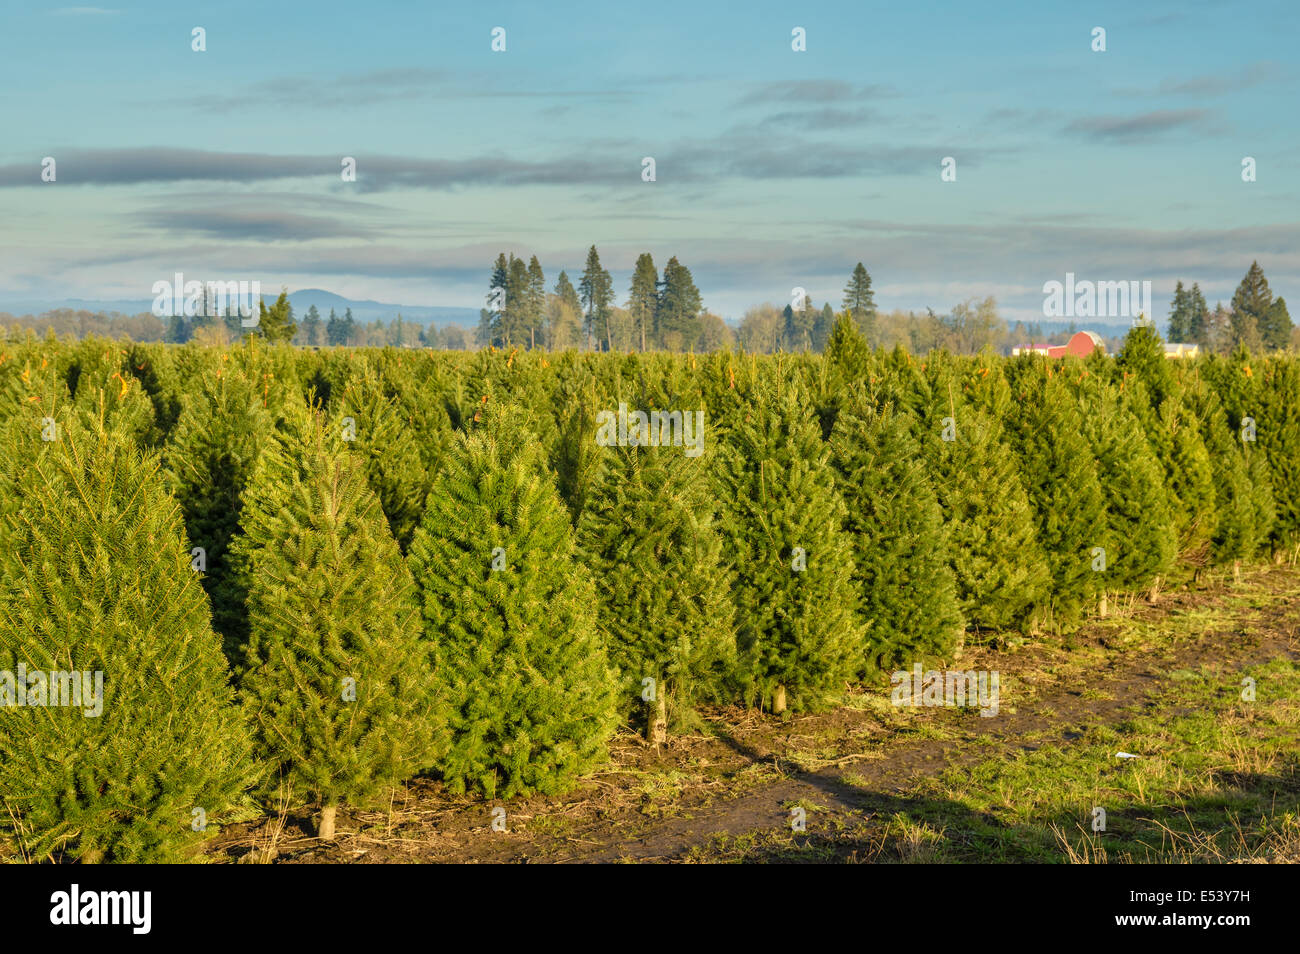 Rows of evergreen trees for Christmas trees in a nursery Stock Photo